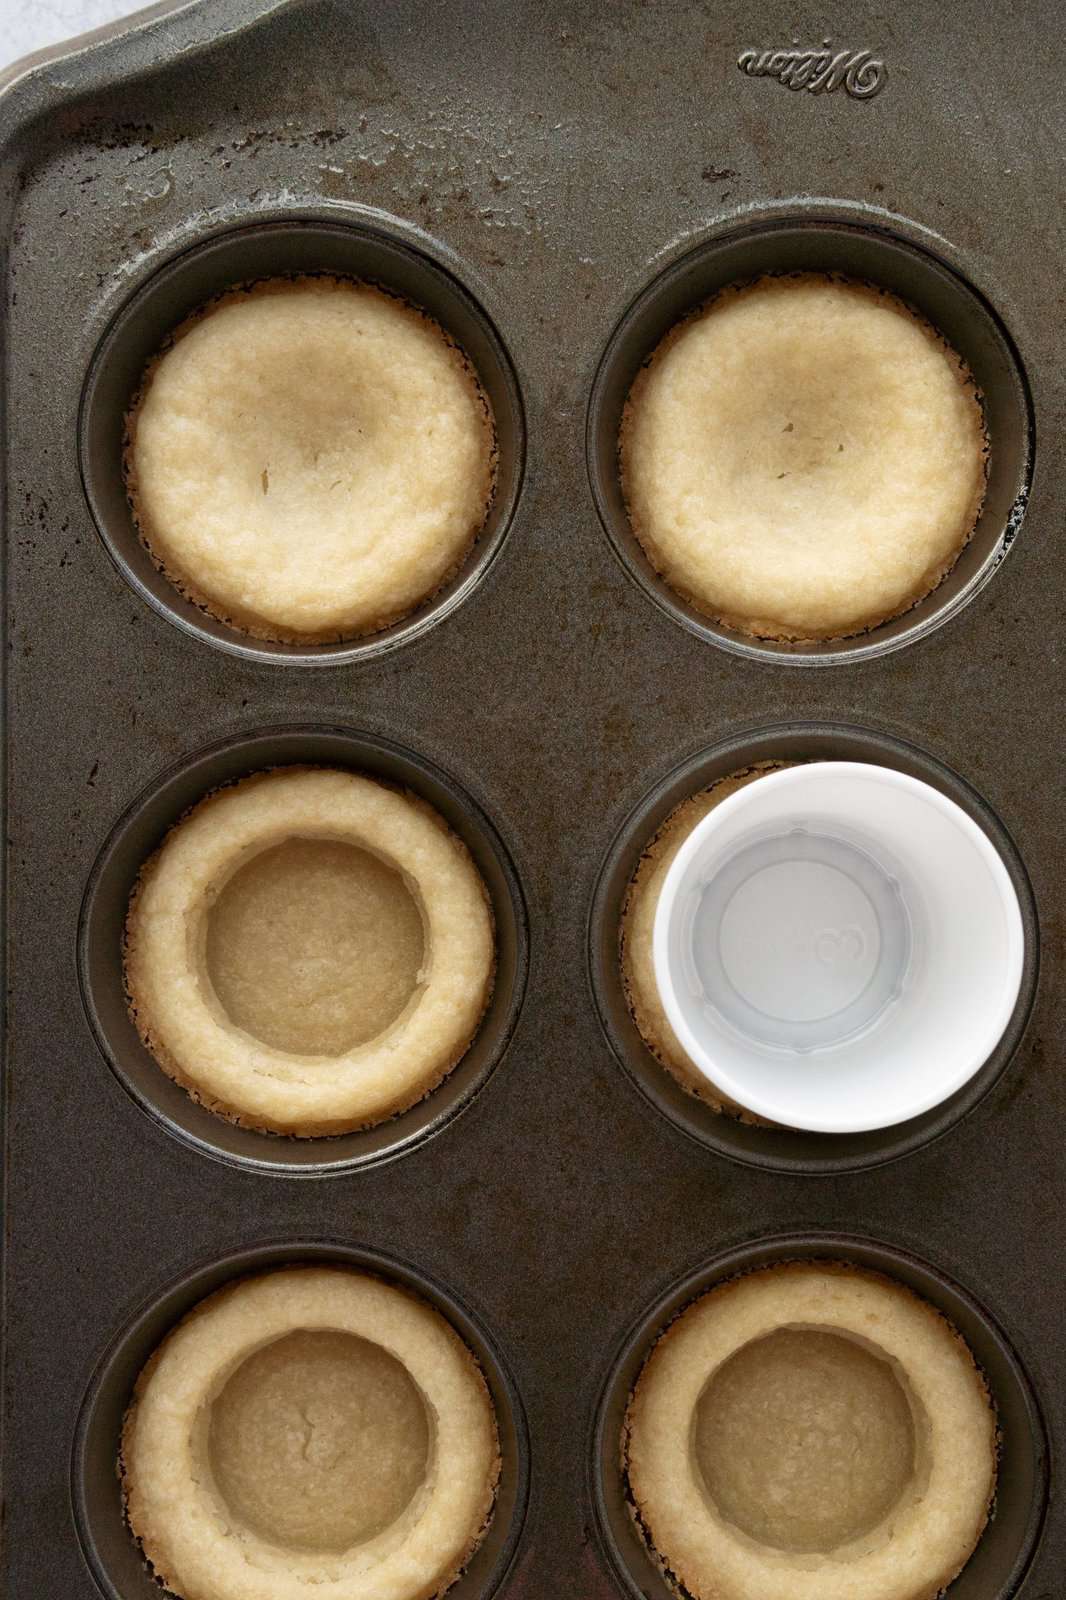 Baked cookie dough with shot glass pressing down more depressions in dough.